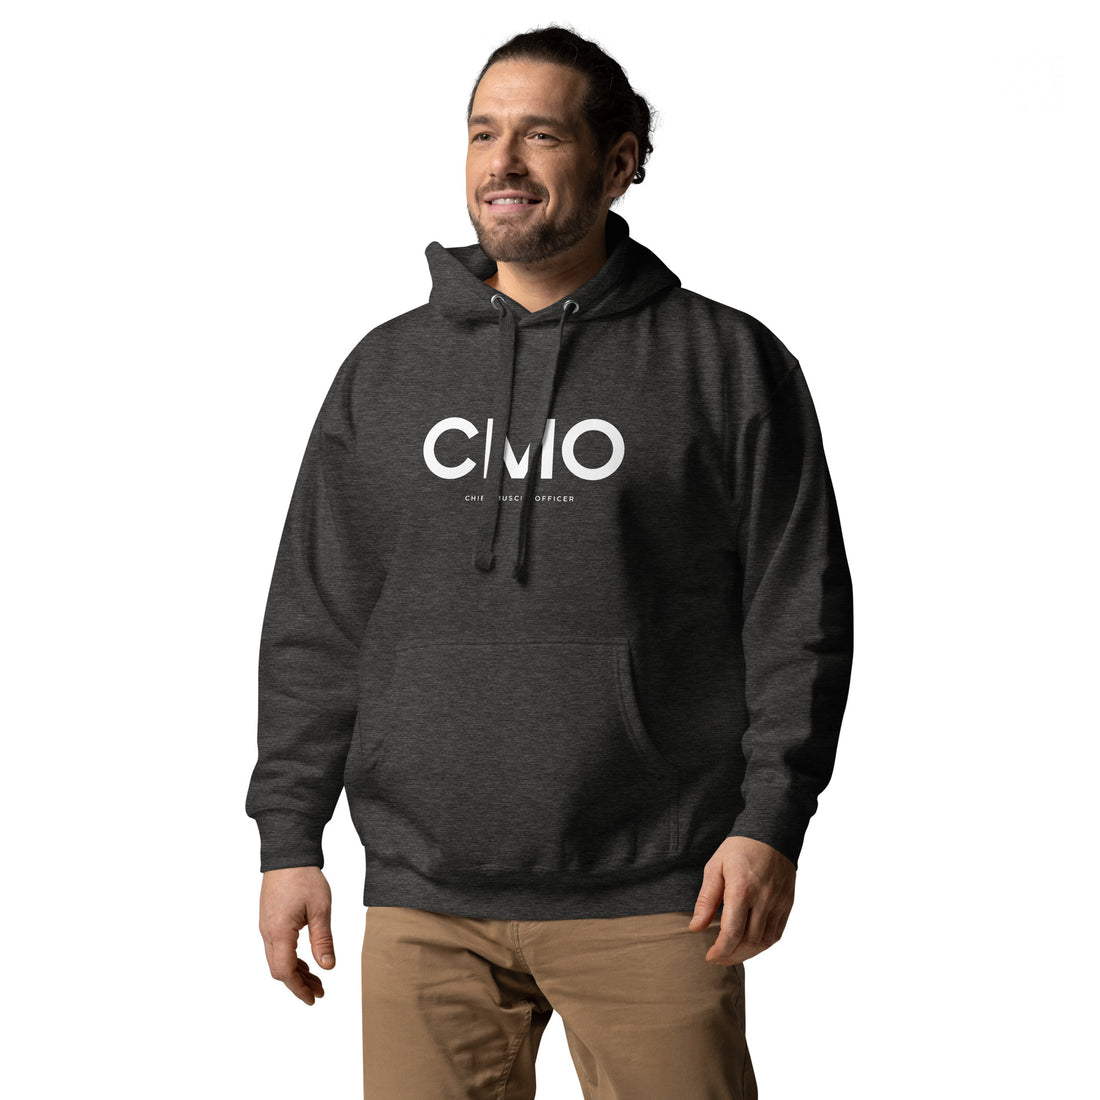 Chief Muscle Officer – Unisex Hoodie